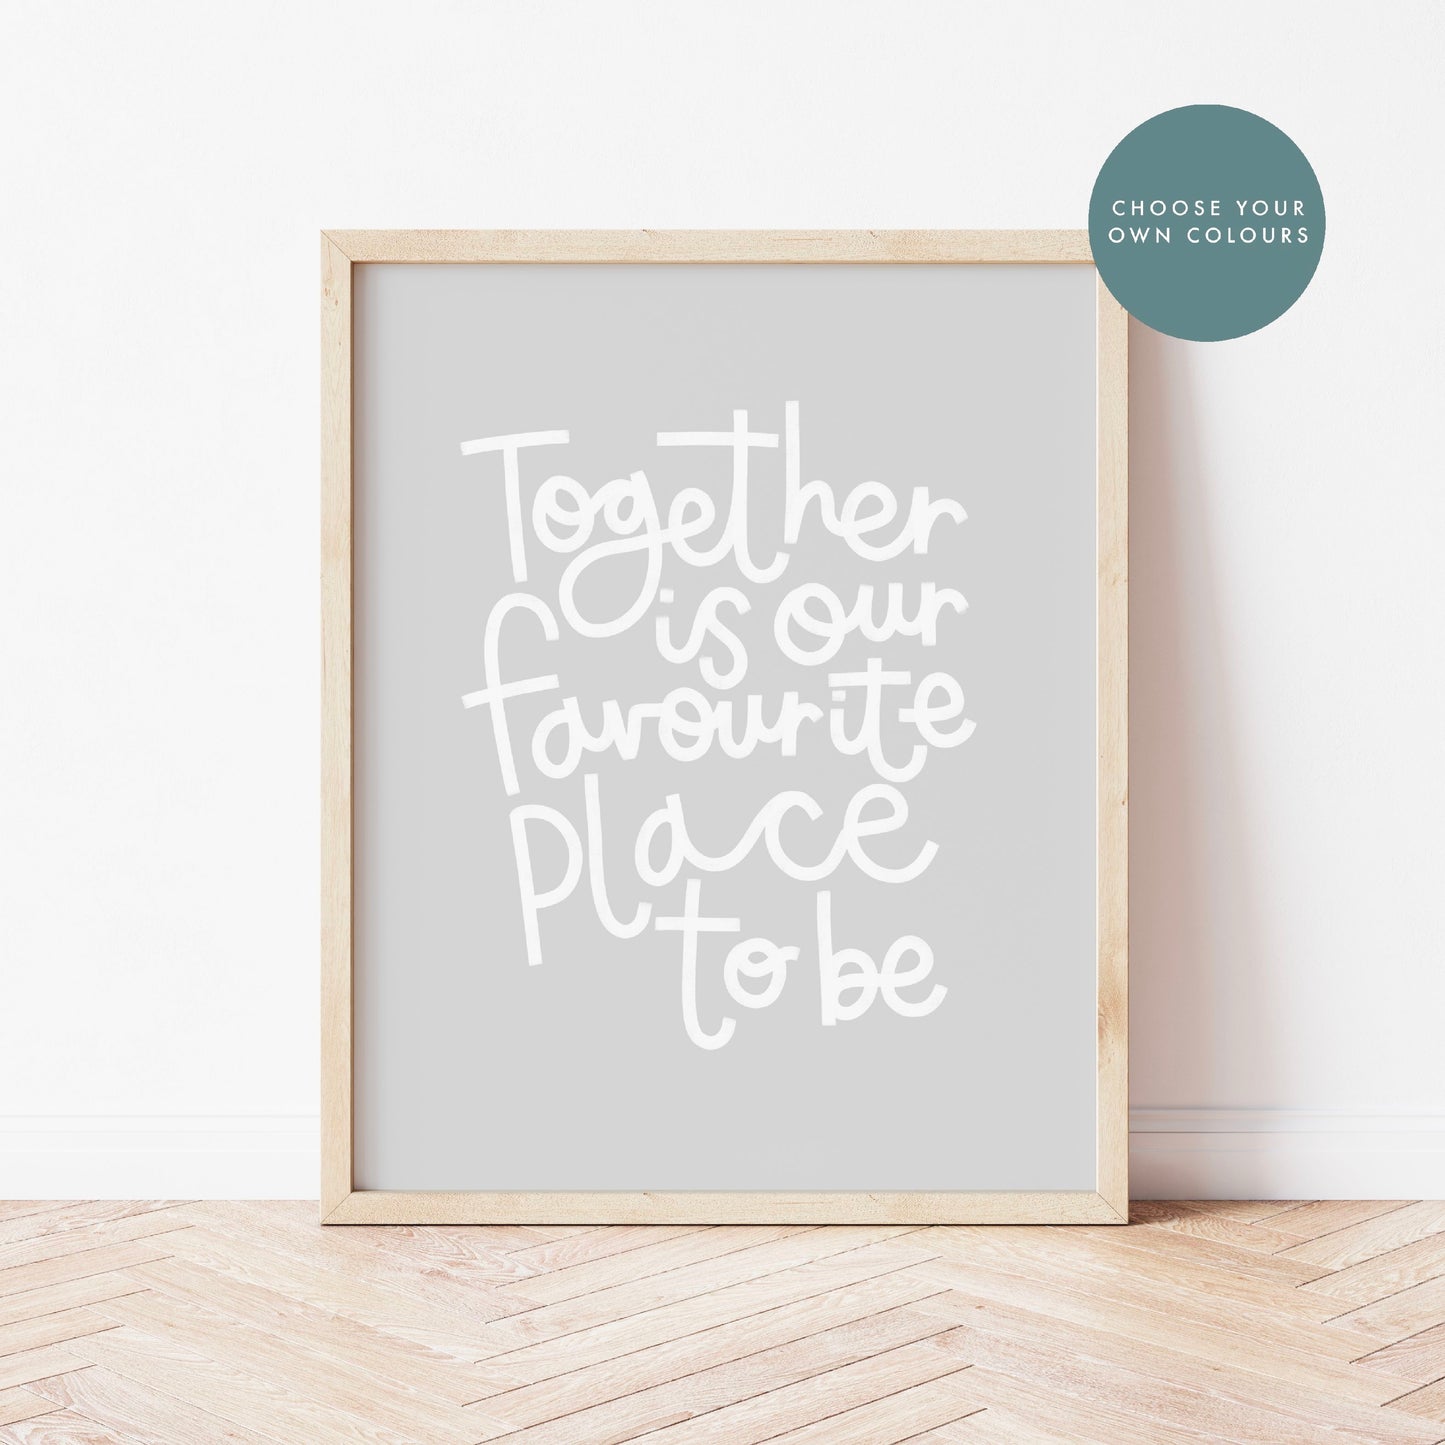 Favourite Place To Be Print Limited Edition Choose Your Own Colours